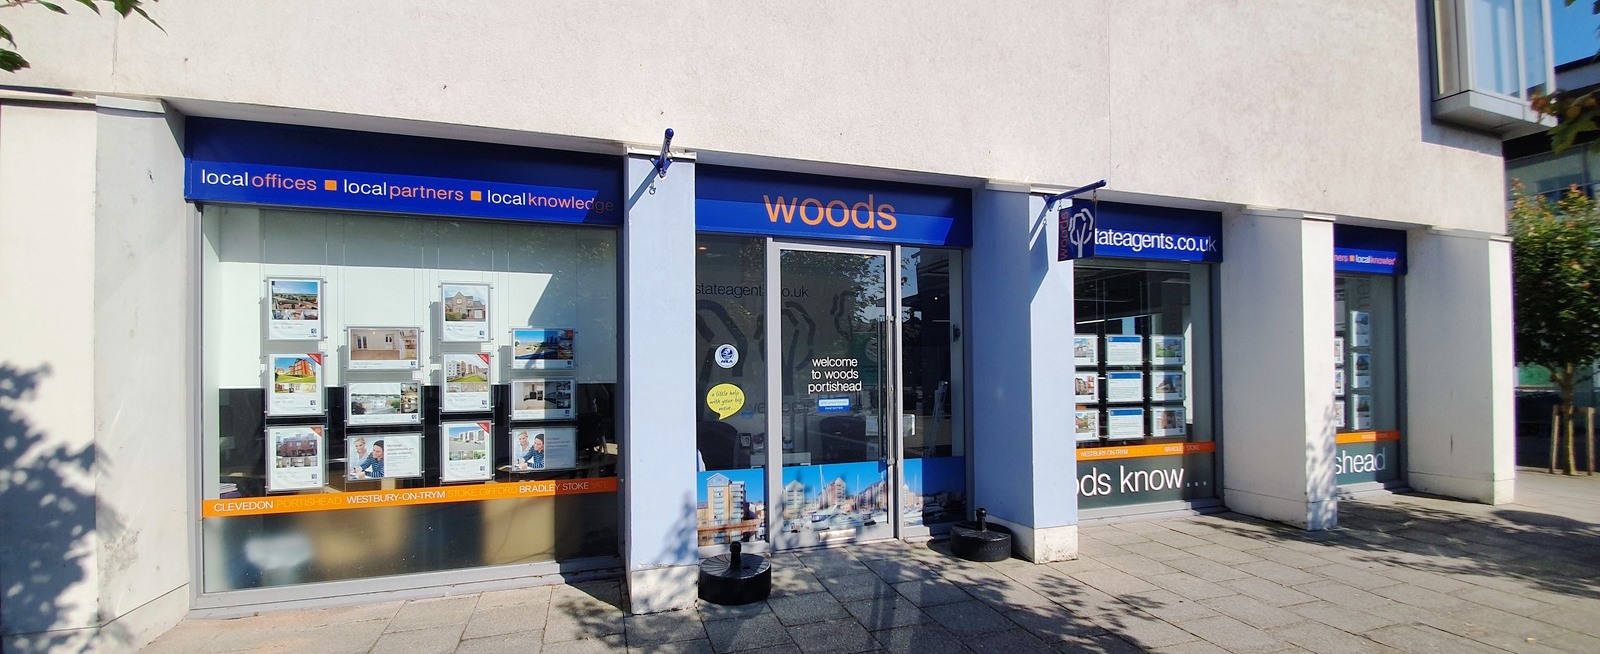 Images Woods Sales and Letting Agents Portishead